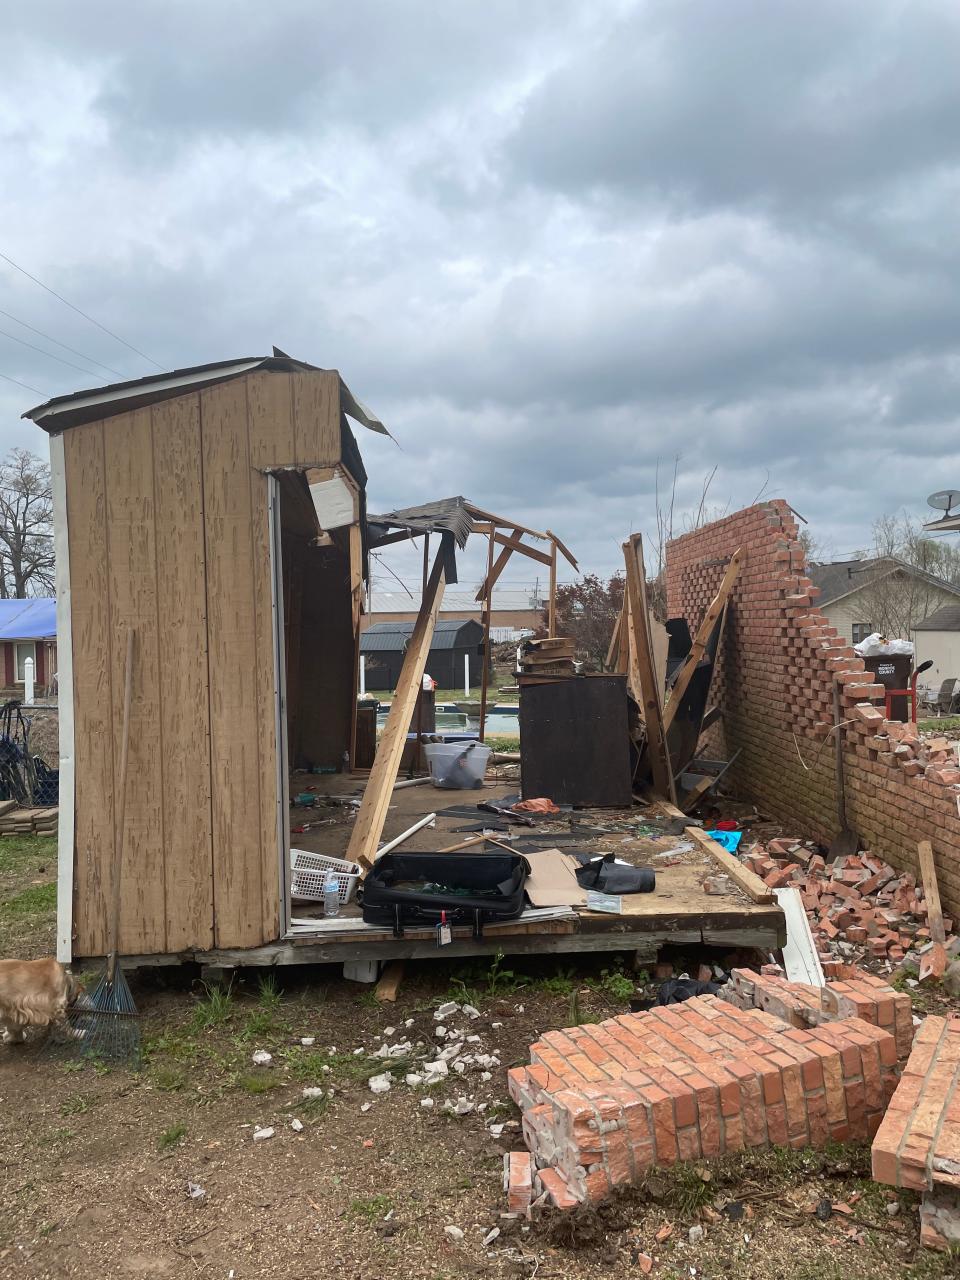 Sandra Koenig's yard in Amory, Mississippi, was badly damaged after tornadoes ripped through the area last month.